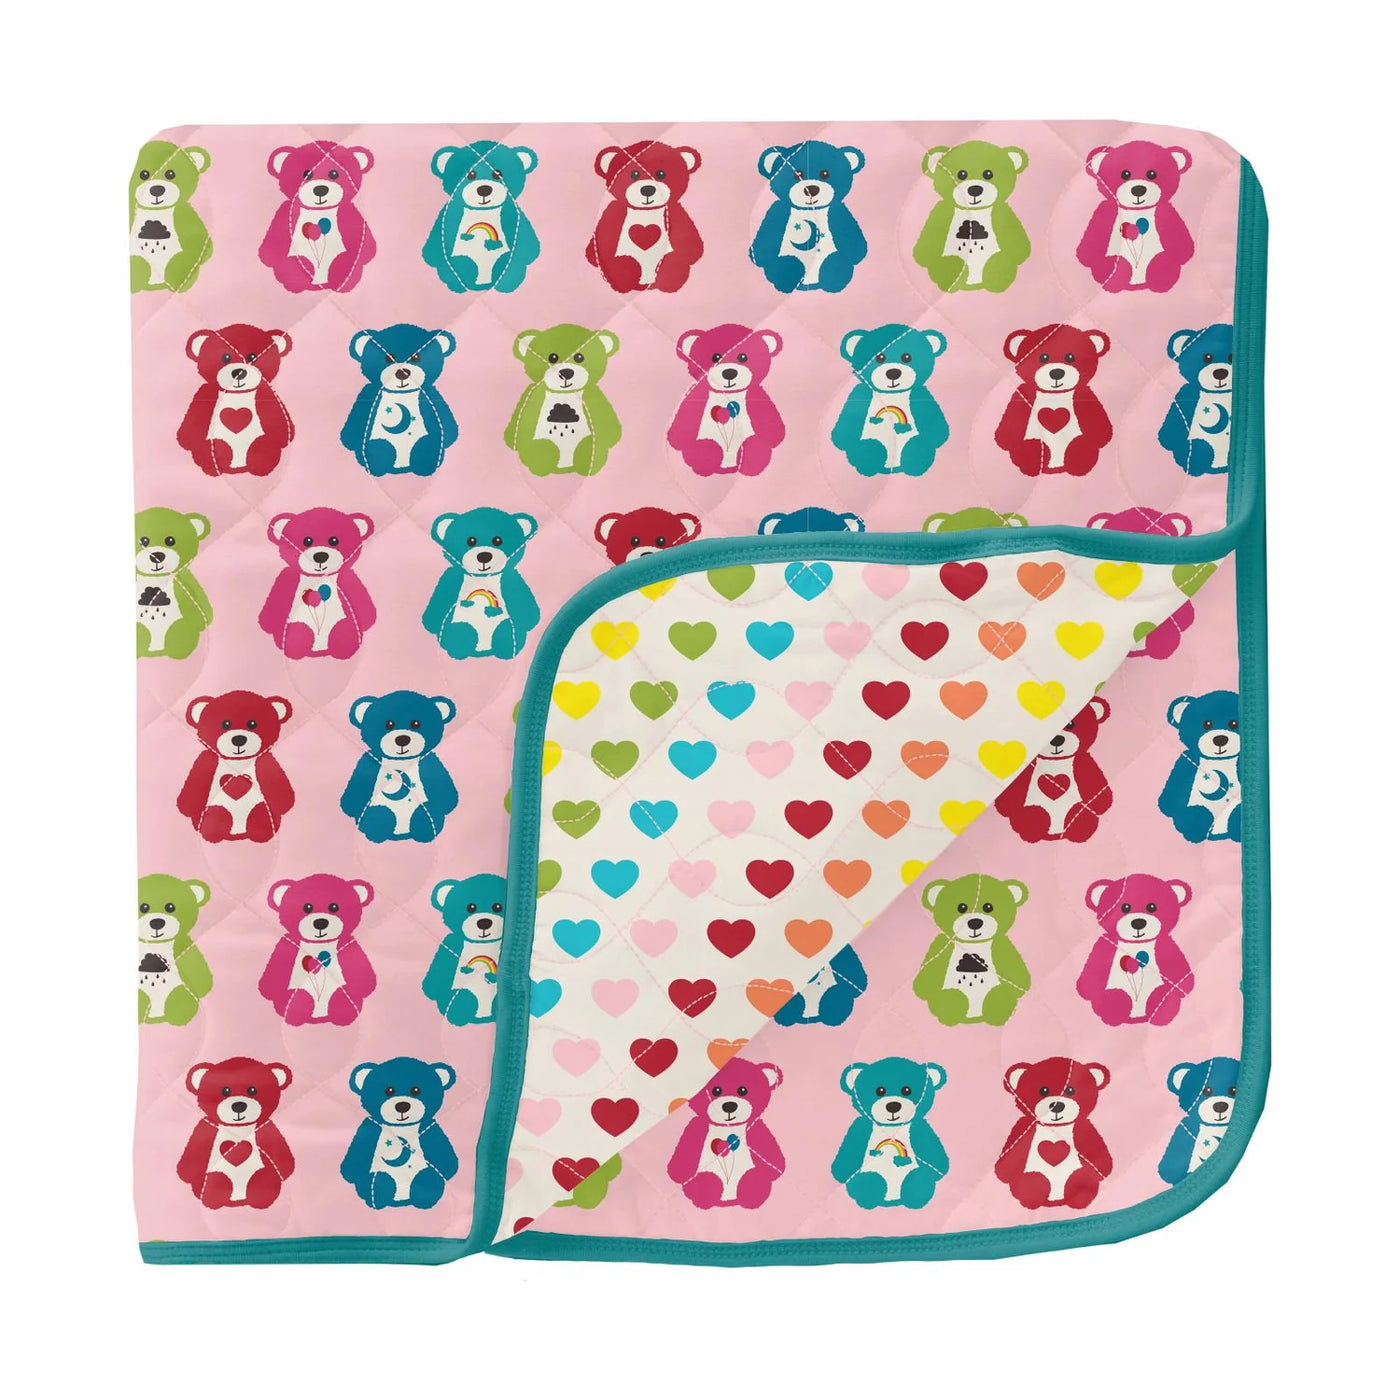 Print Quilted Toddler Blanket in Lotus Happy Teddy/Rainbow Hearts